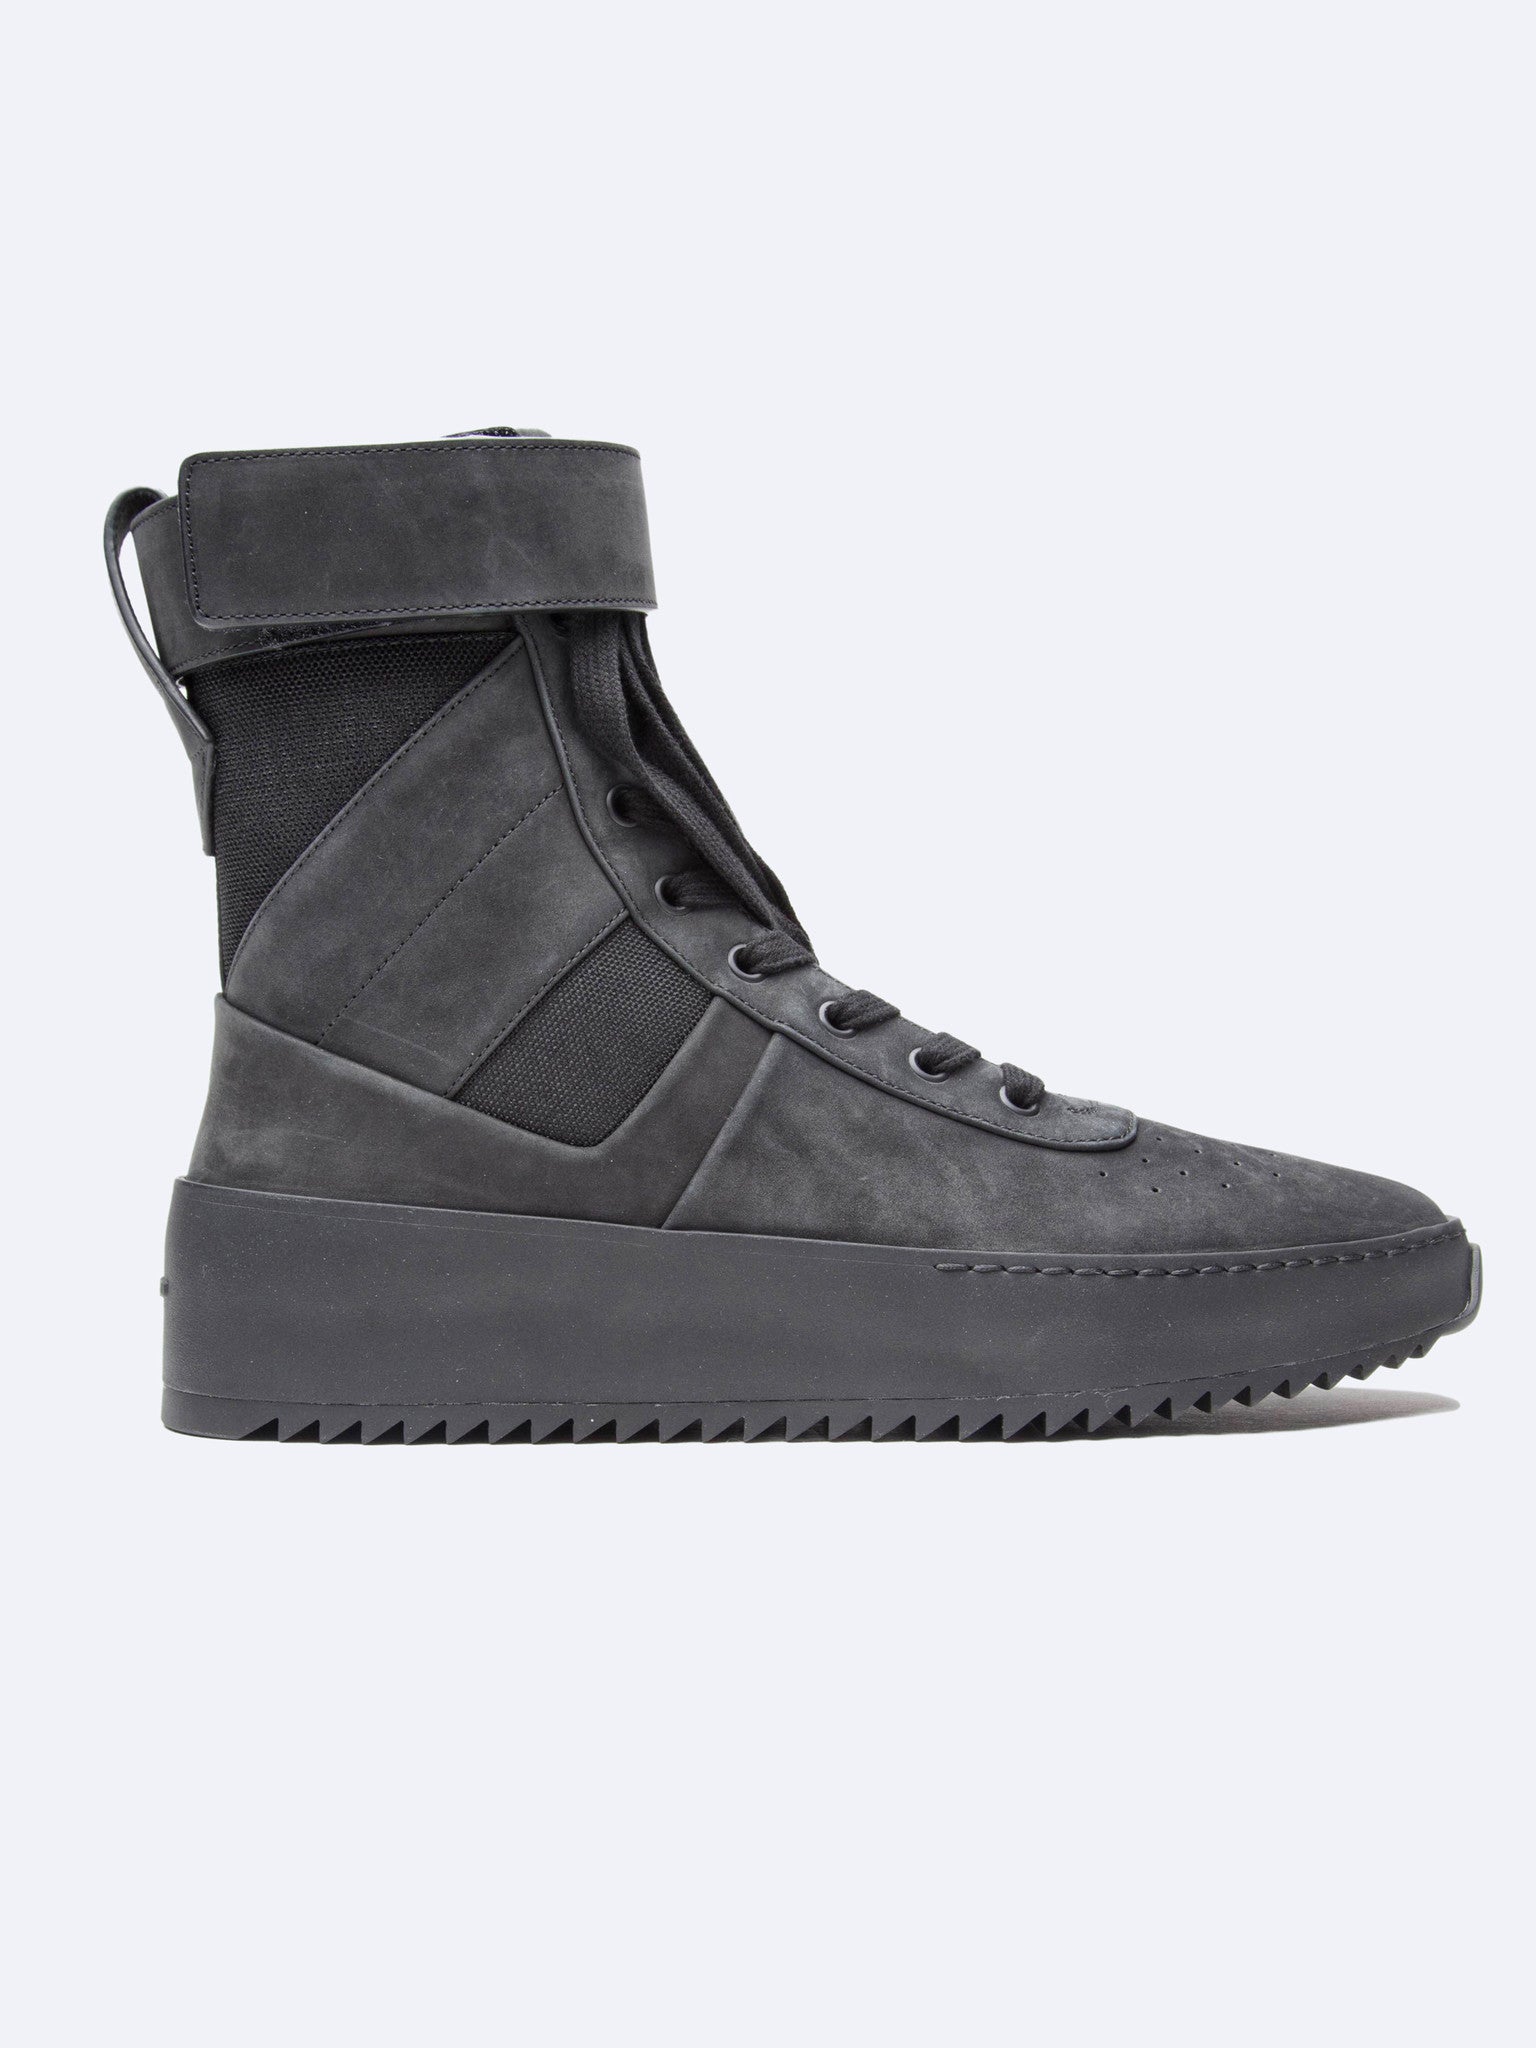 Buy Fear of God Online at UNION LOS ANGELES